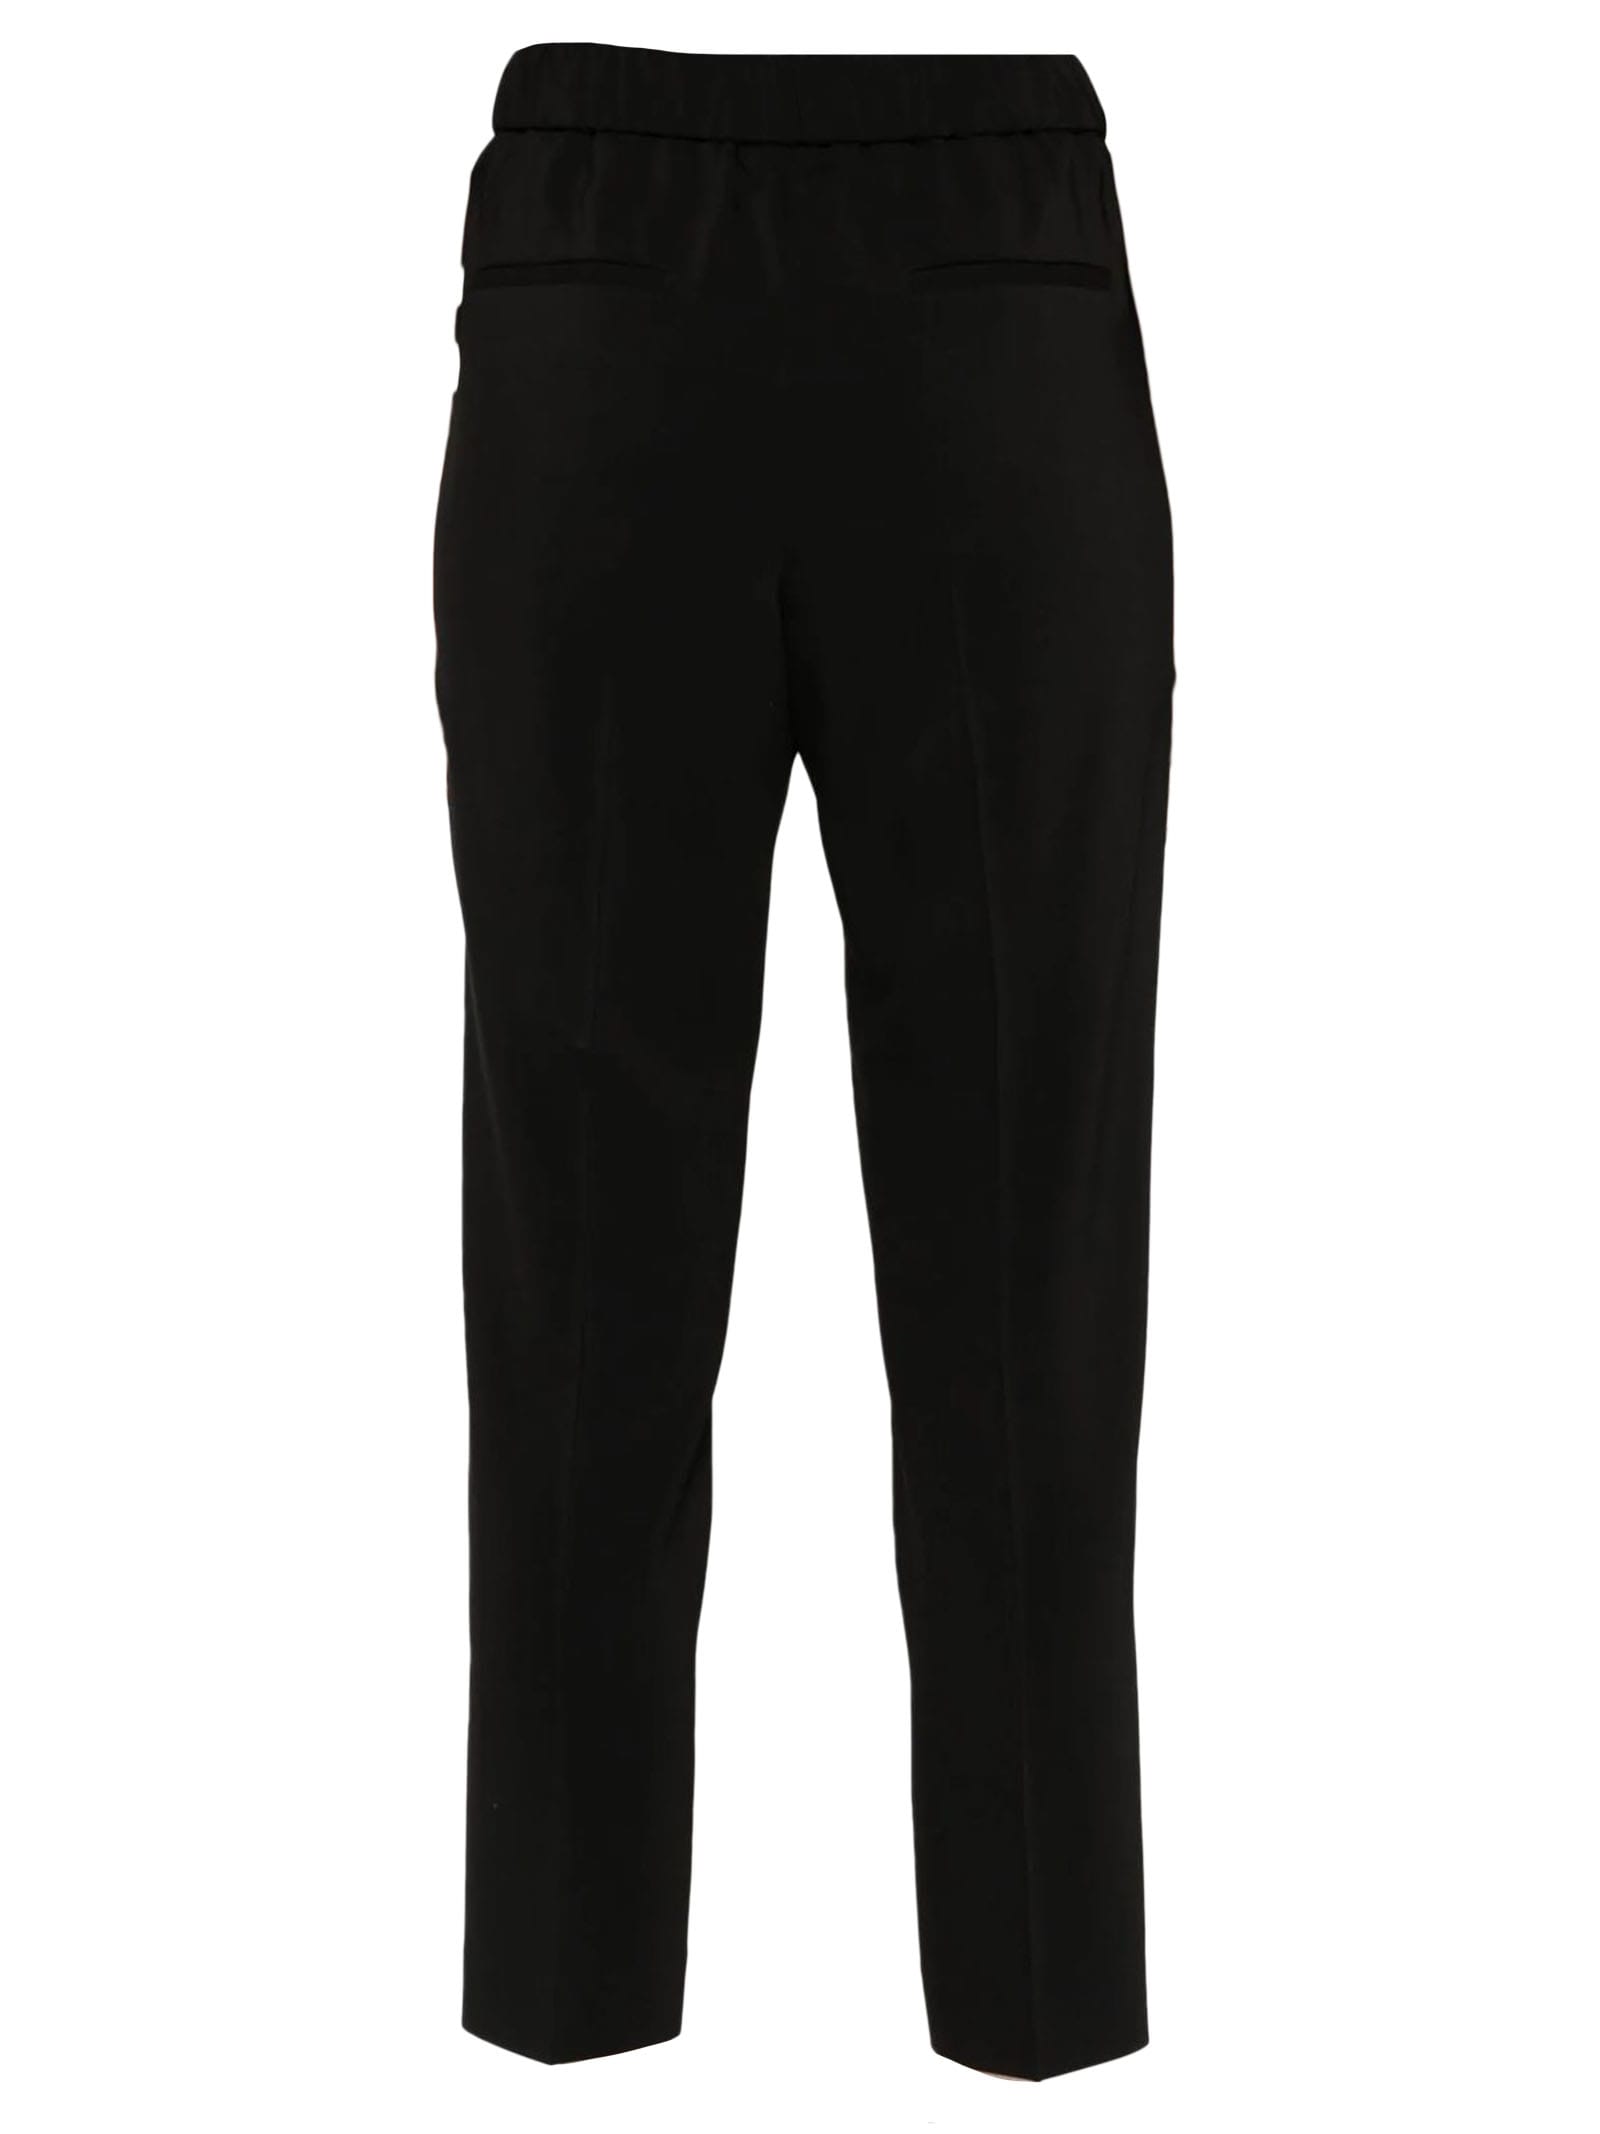 Shop Peserico Black Tapered Trousers